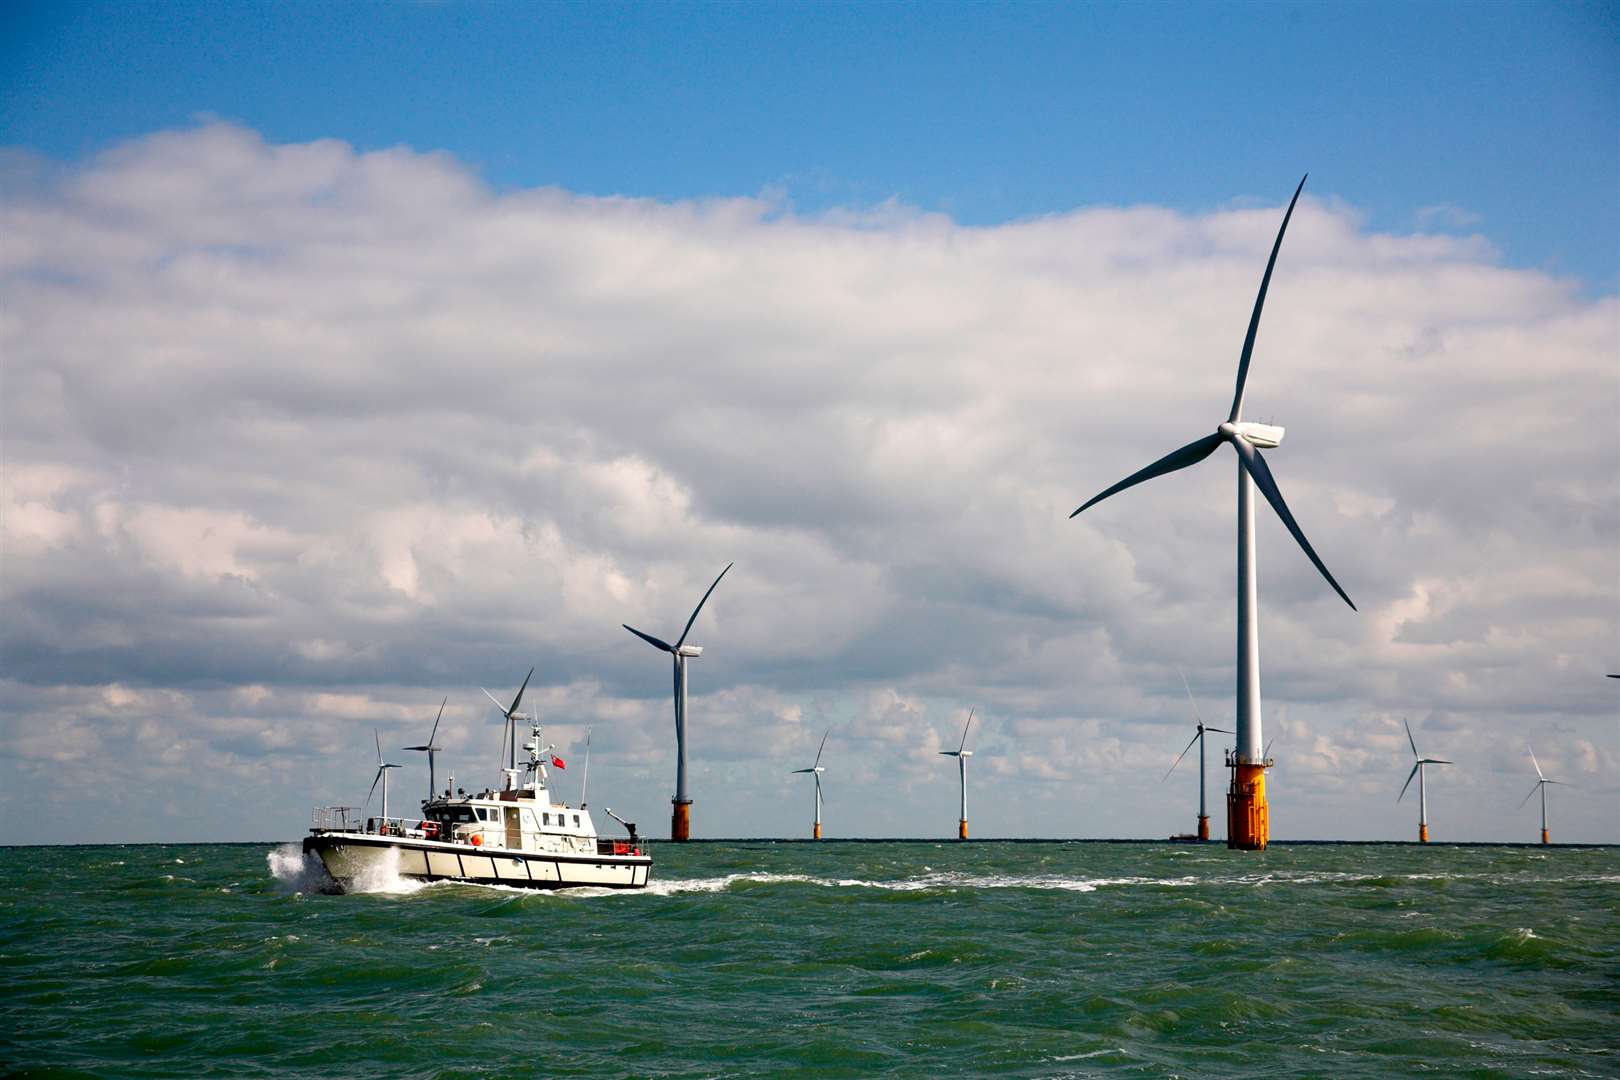 Balfour Beatty has sold off most of its stake in the transmission system which links Thanet Offshore Wind Farm to the National Grid